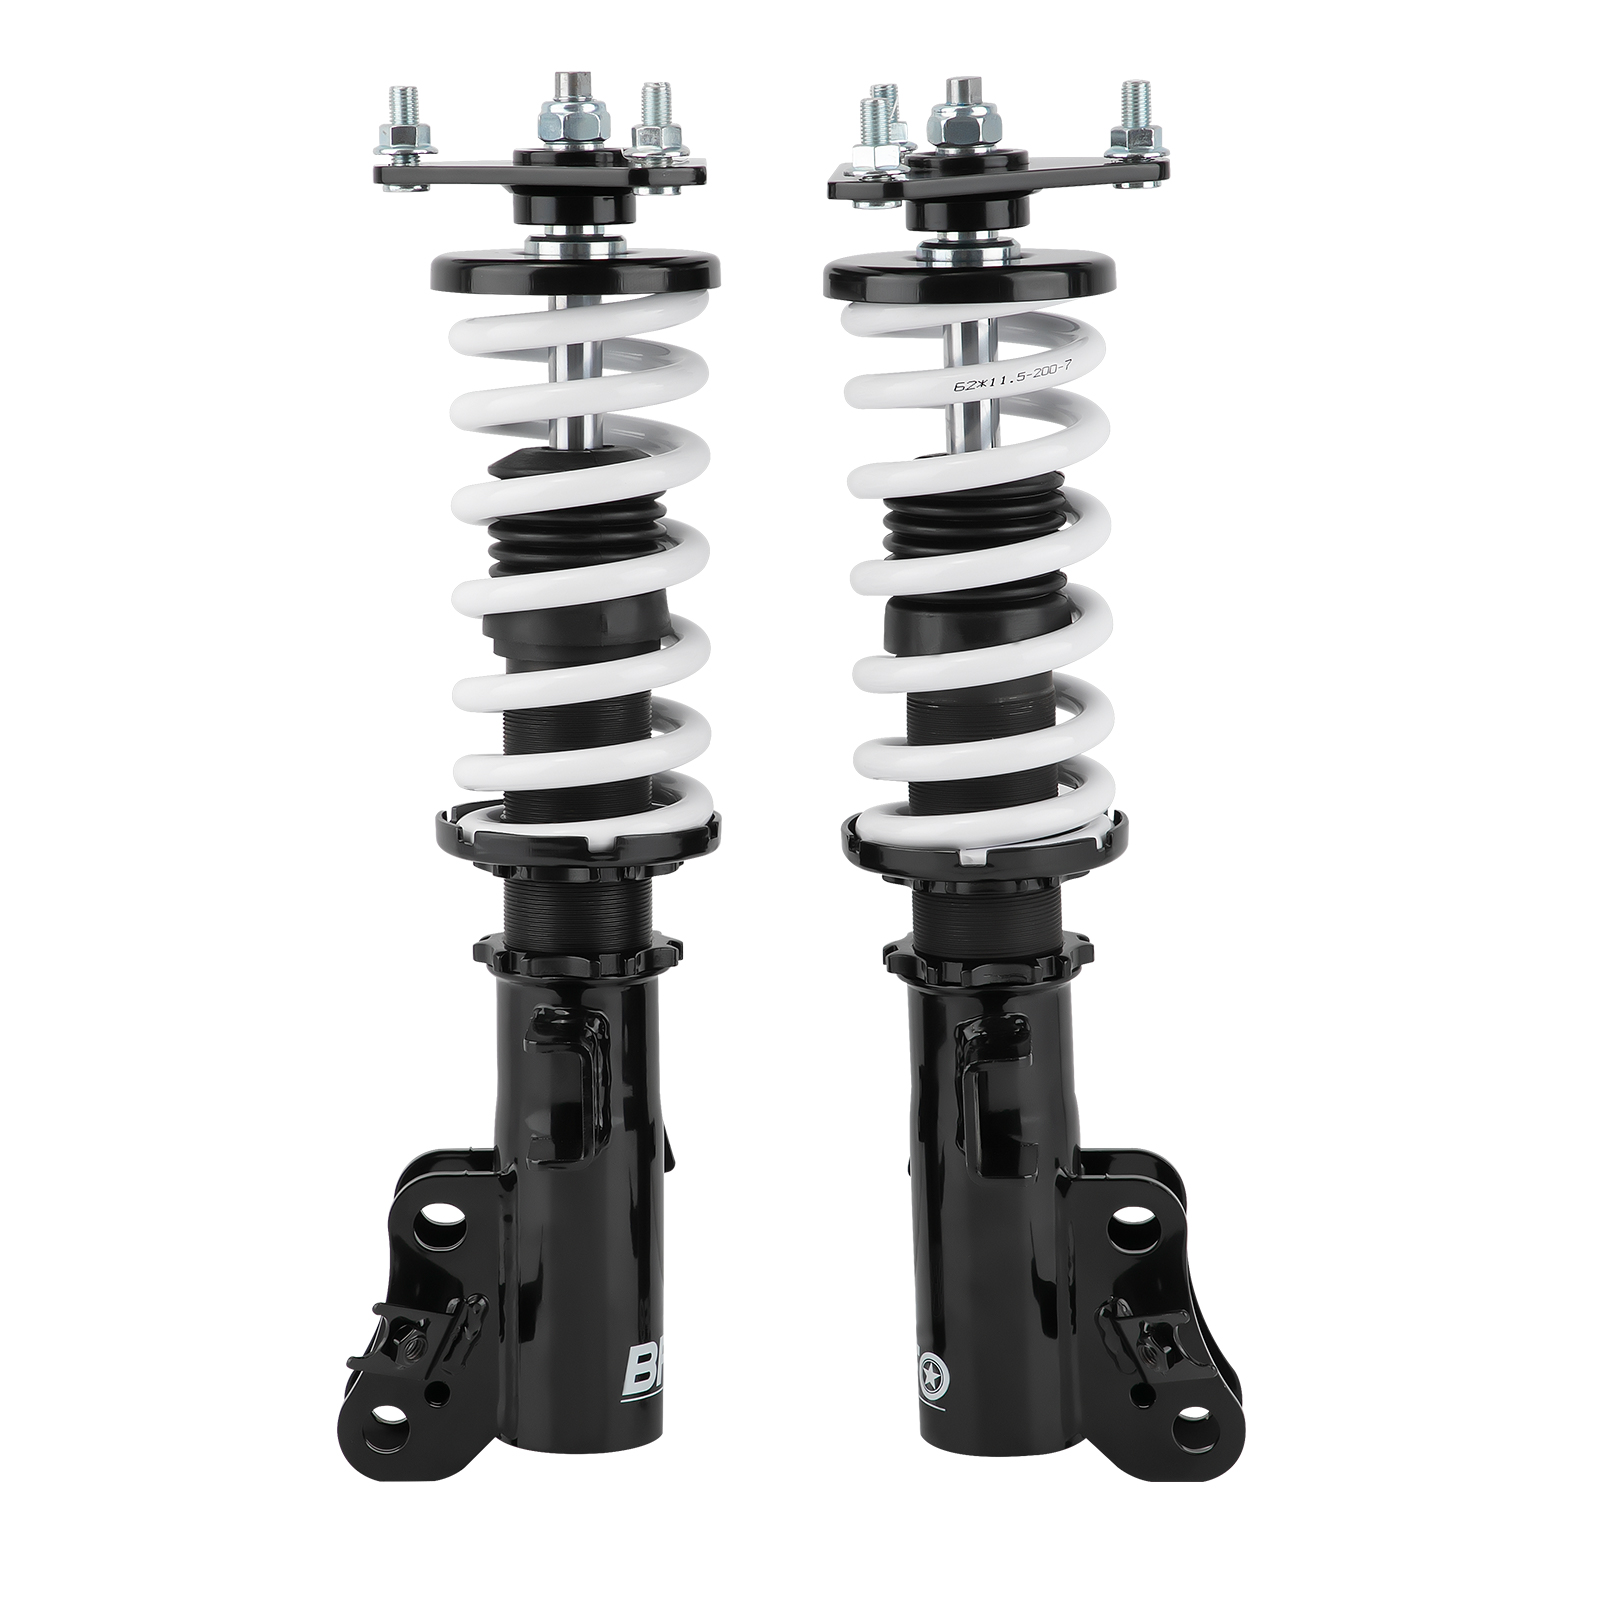 BFO COILOVERS HEIGHT ADJUSTABLE FOR HONDA CIVIC 2012-2015 FB FG